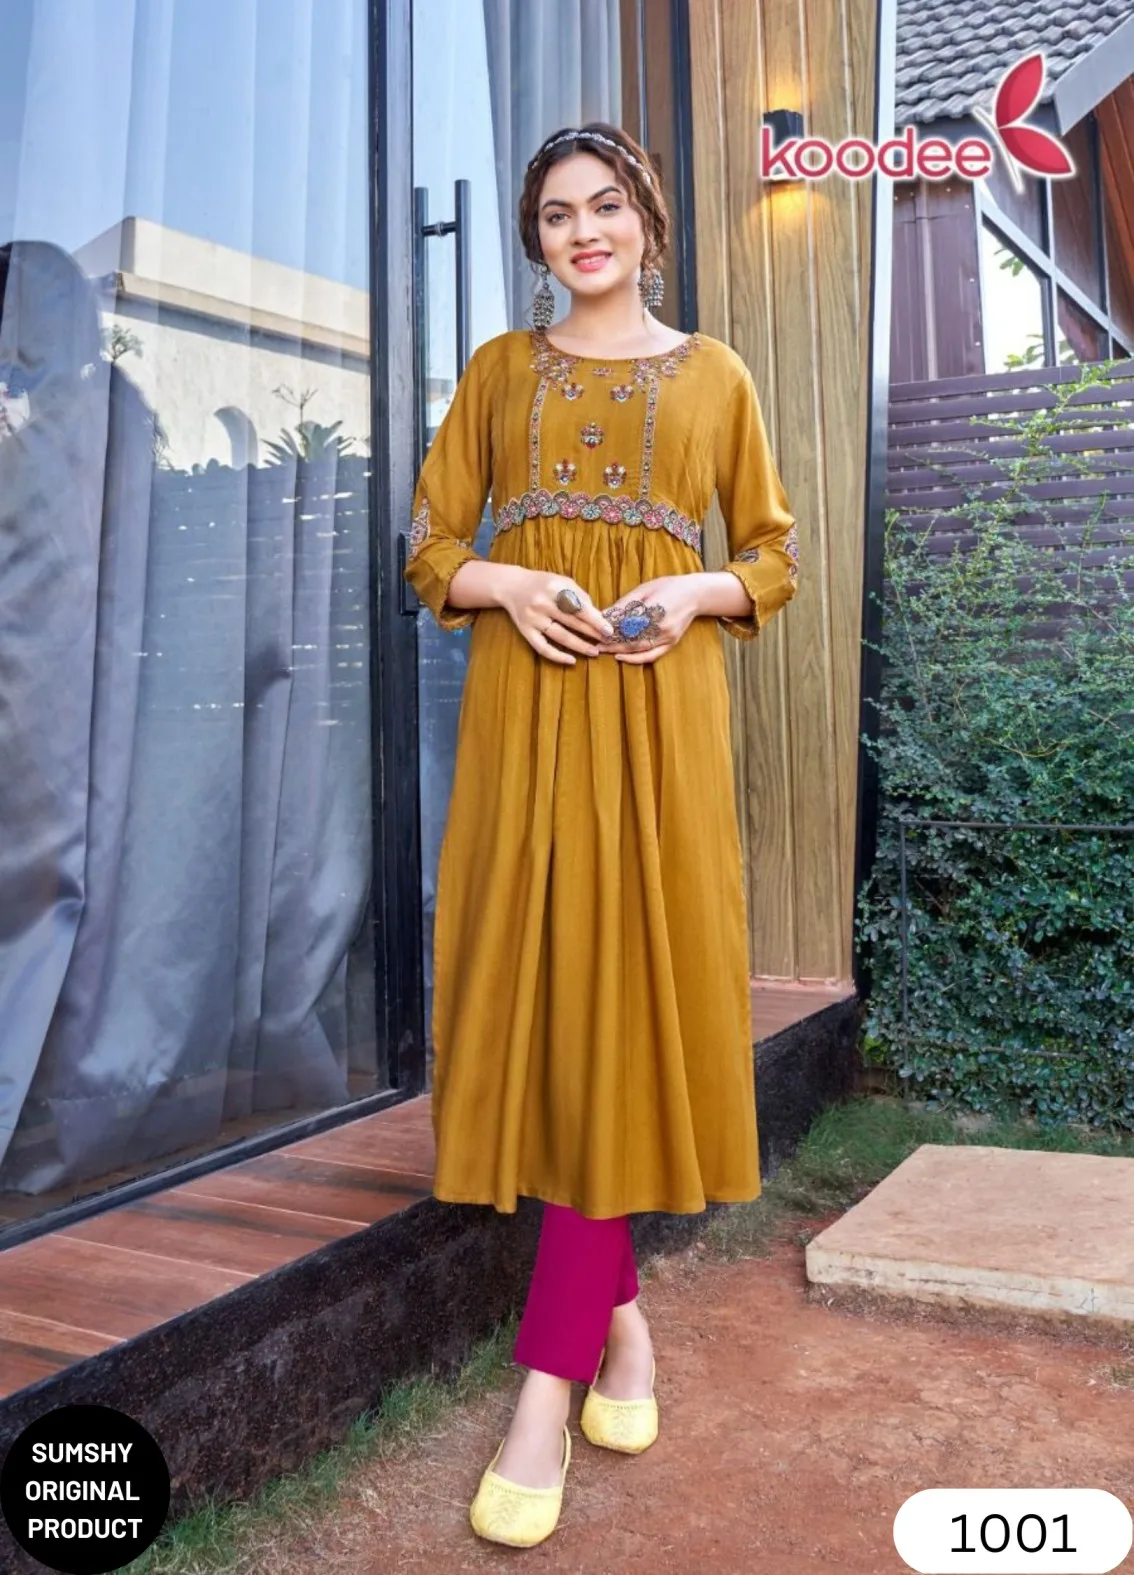 Wholesale Kurti, Tops, Salwar Suits, Dress Material and Leggings for Sale  in Hyderabad, Andhra Pradesh Classified | IndiaListed.com